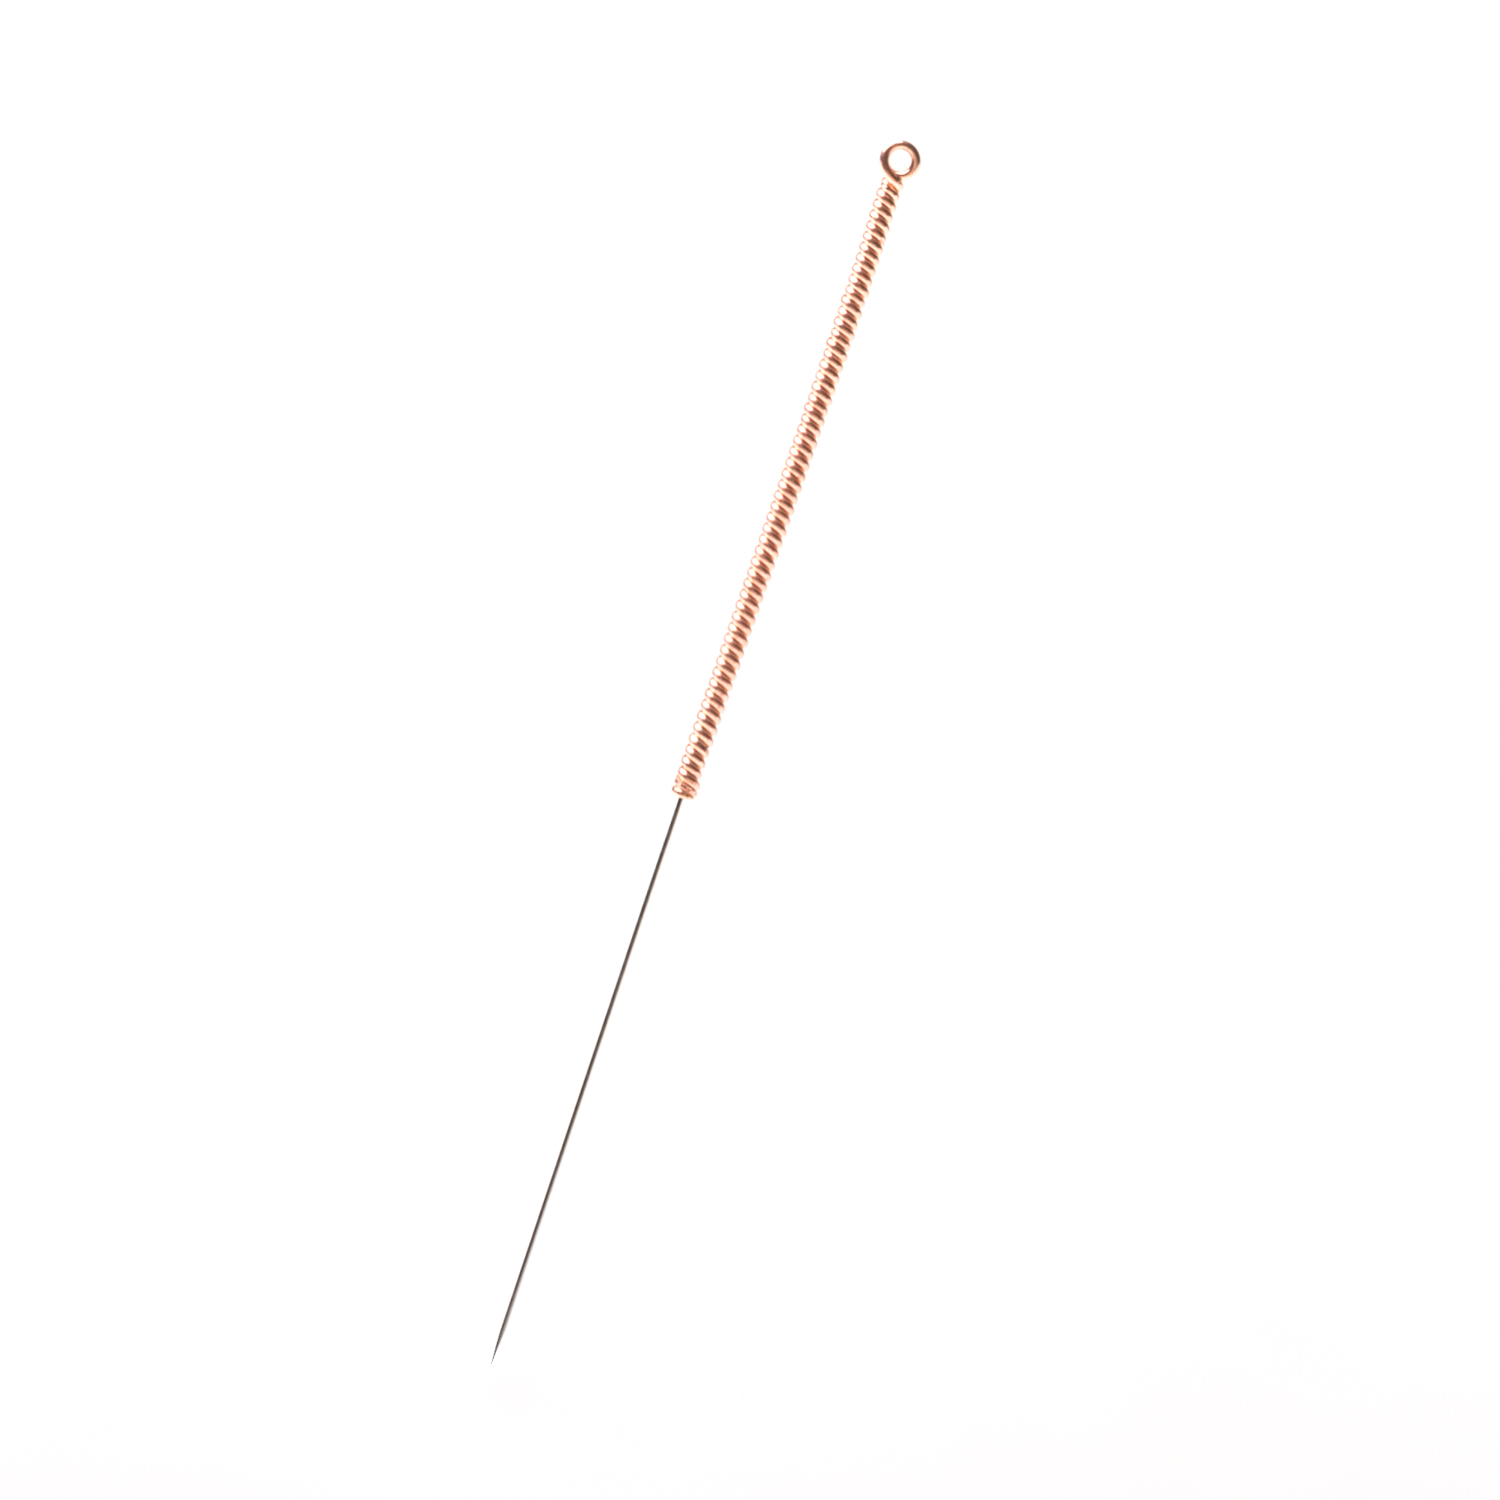 Altra Copper Handle Acupuncture Needle Without Guide Tube (L-Type) 100 Needles